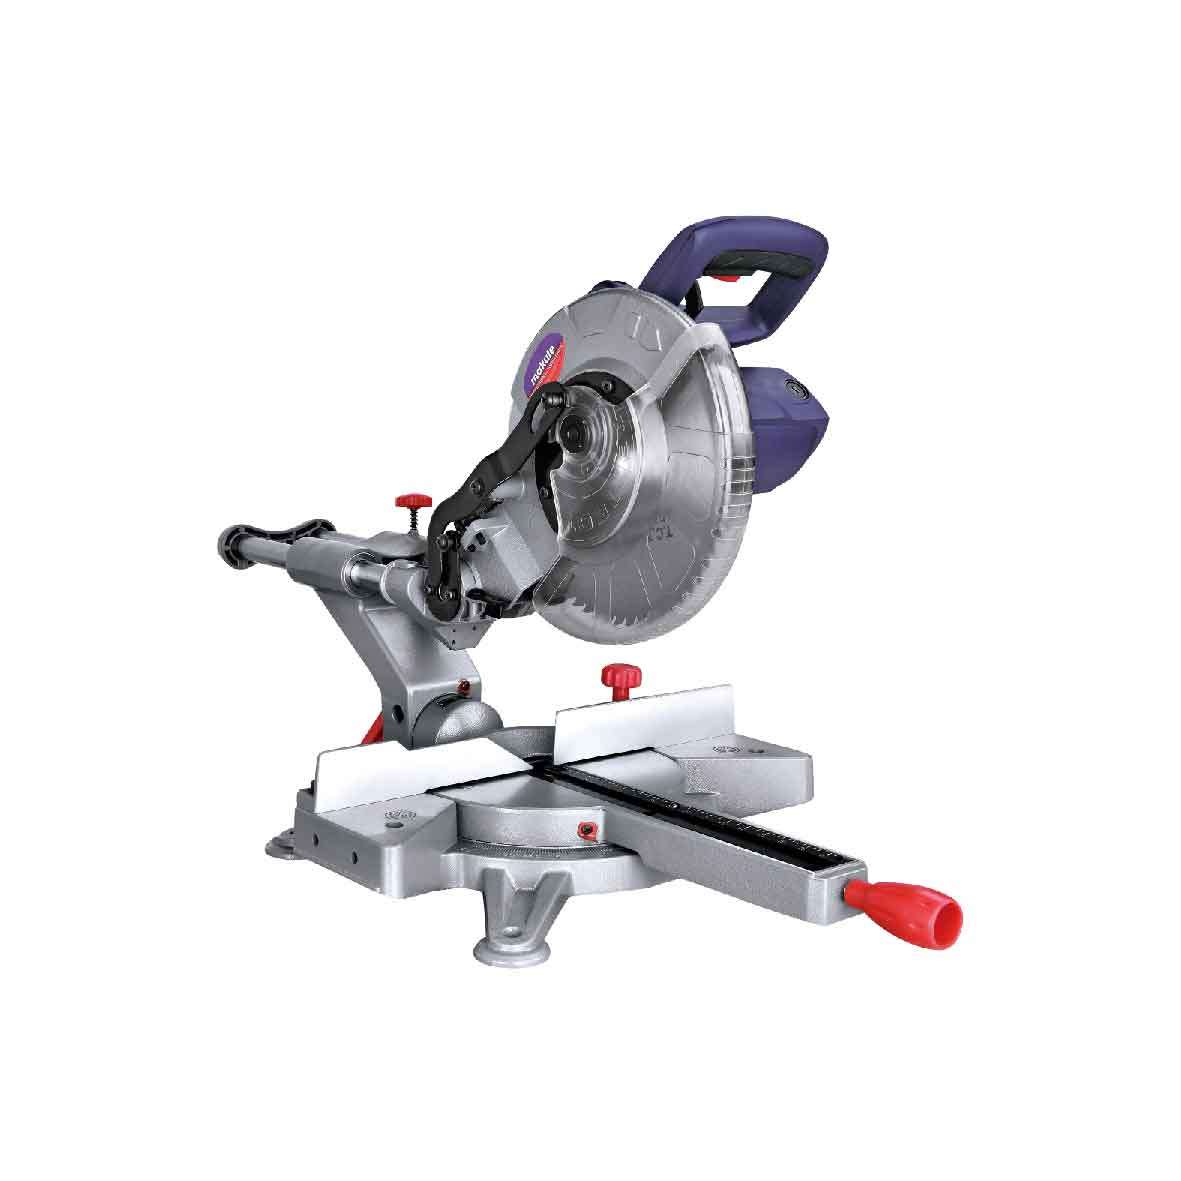 Electric Wood Cutting Miter Saw with Good Performance